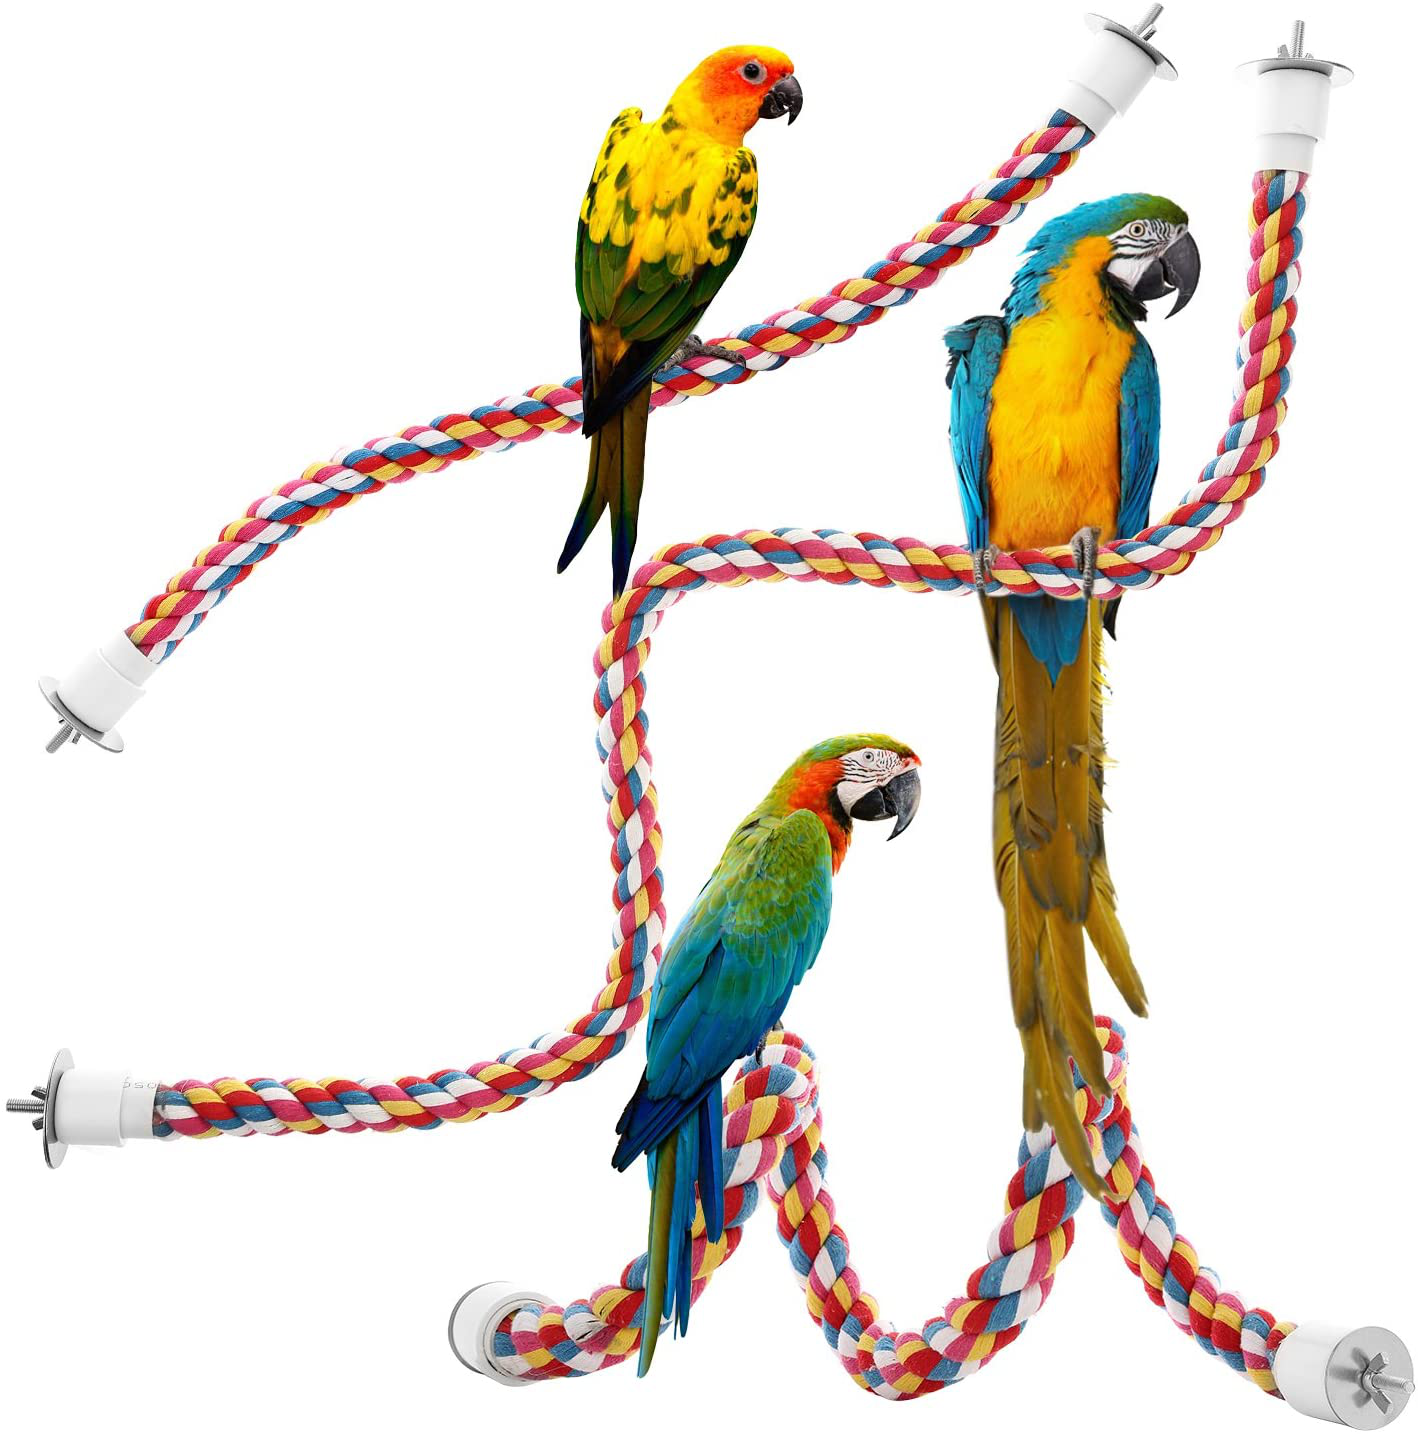 Jusney Bird Rope Perches, Comfy Perch Parrot Toys for Rope Bungee Bird Toy [1 Pack]